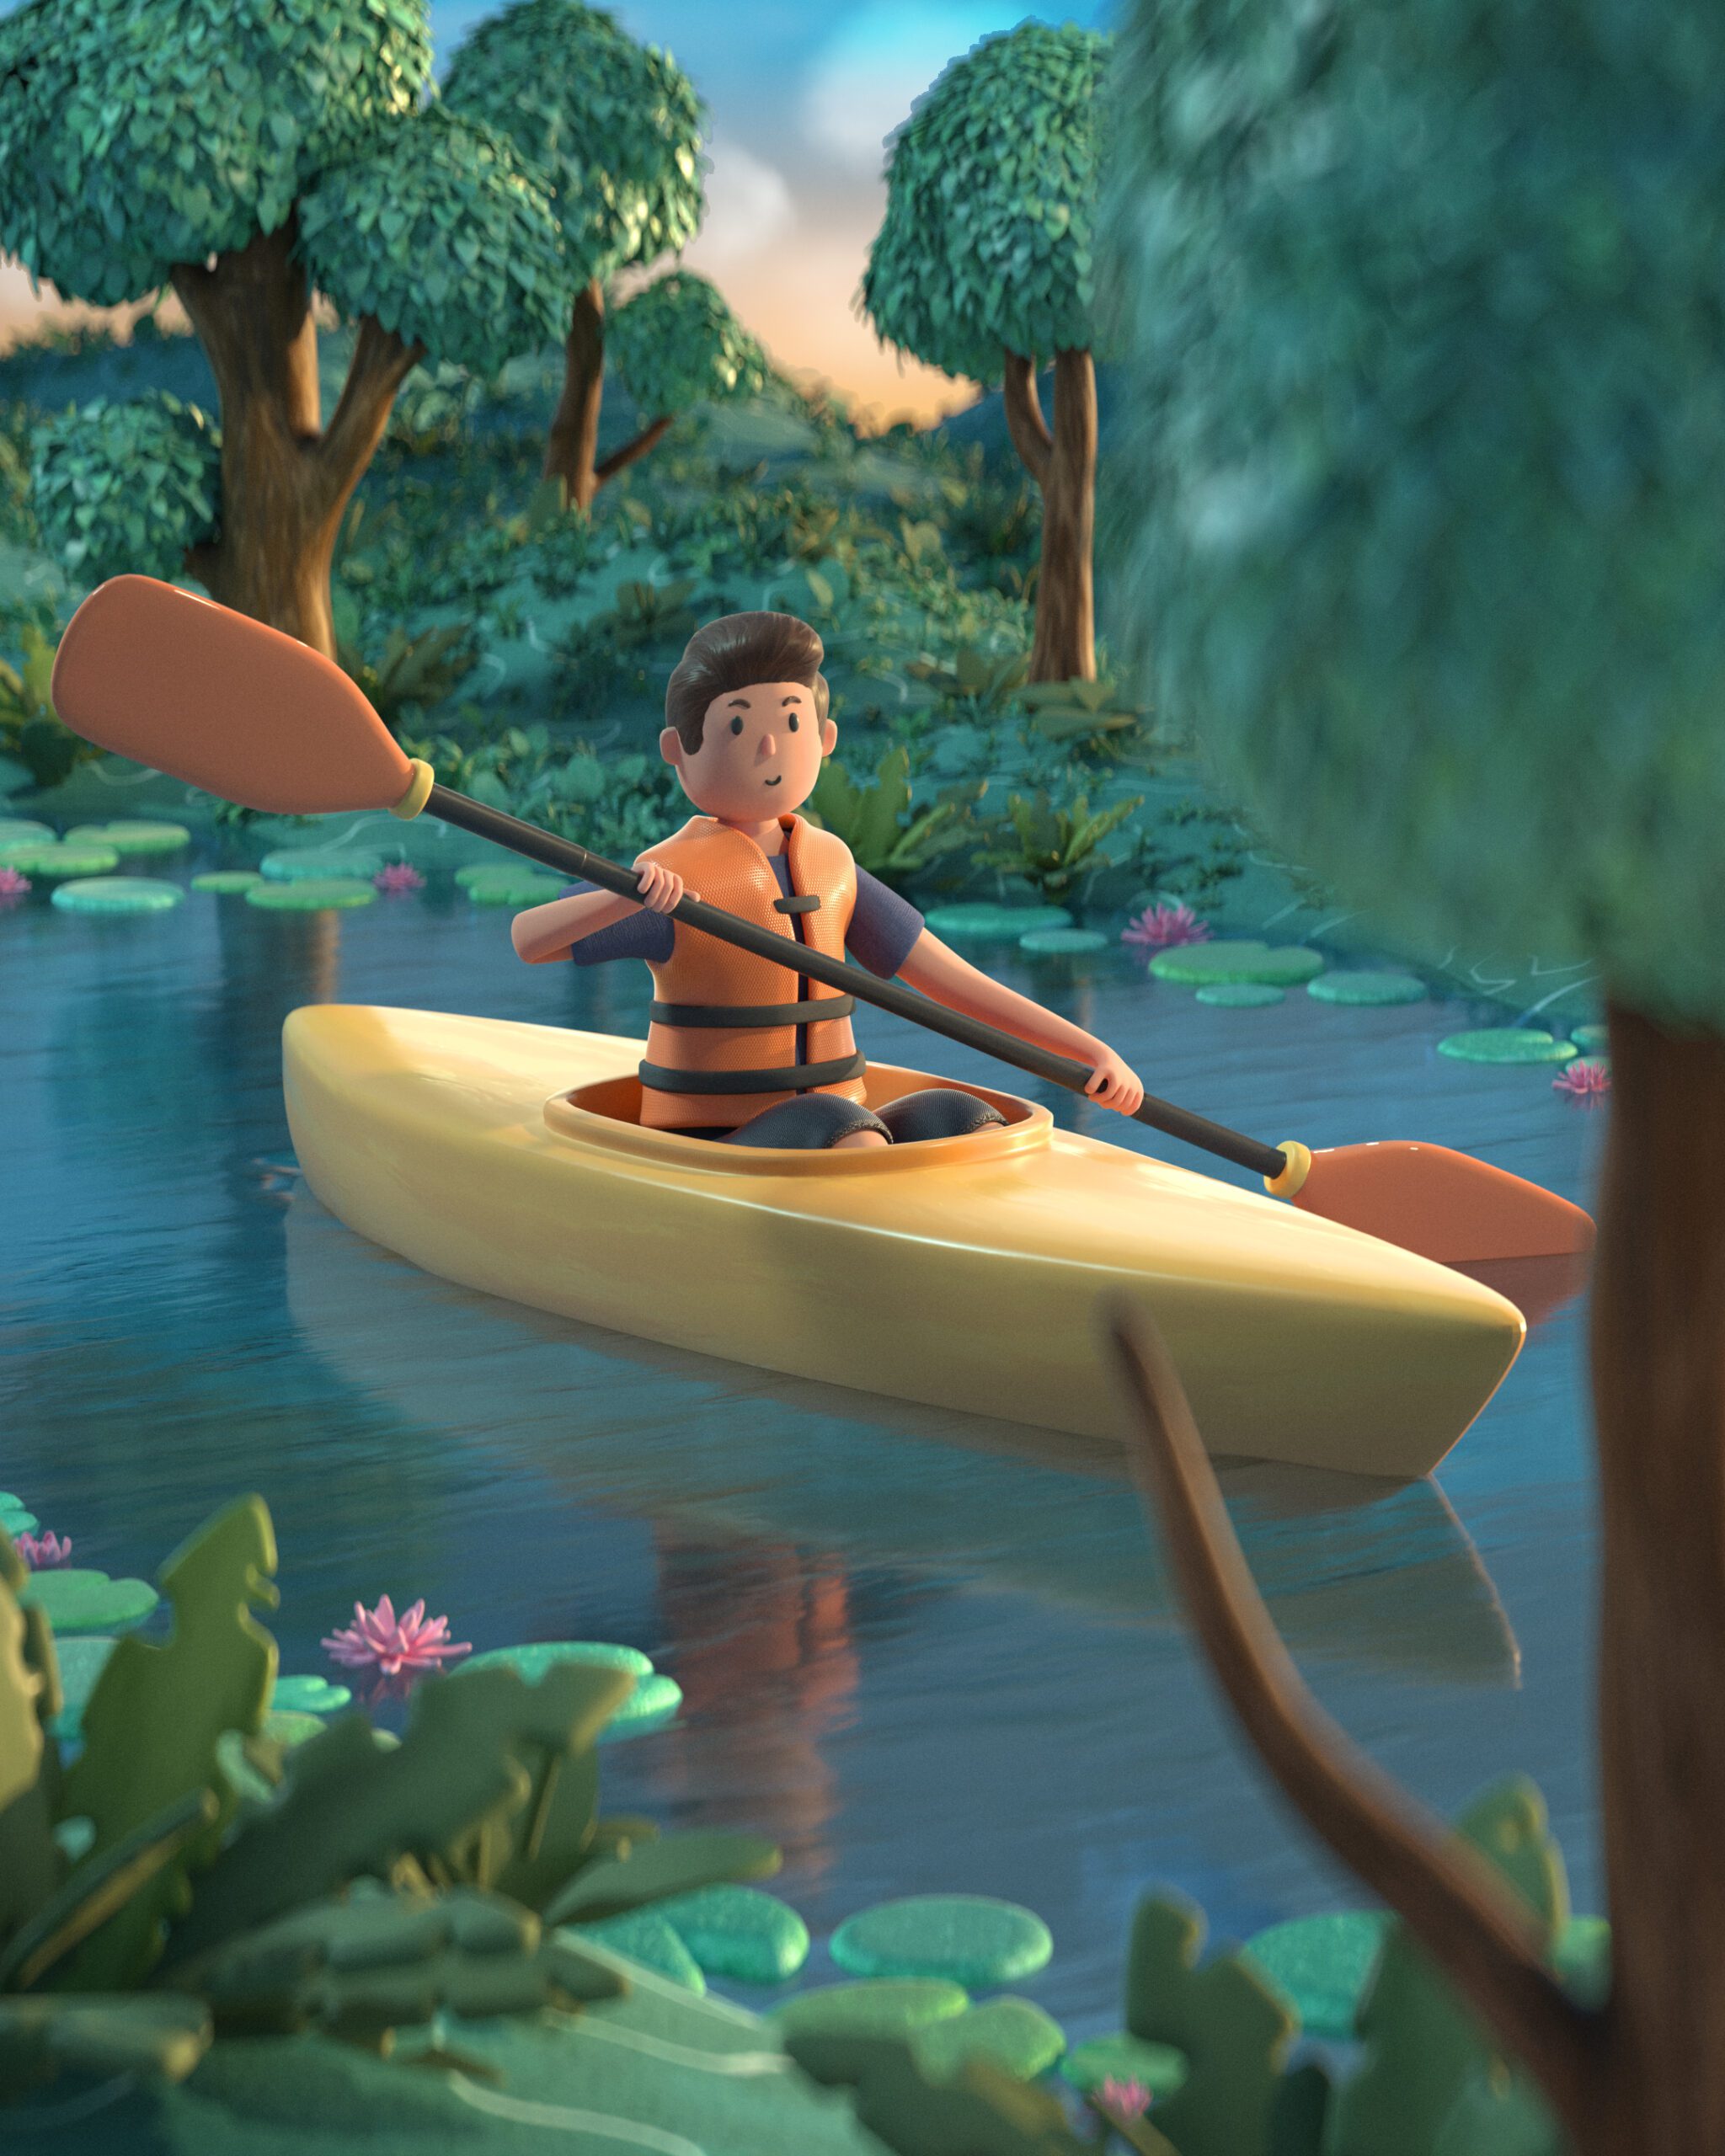 3D Model and Stylized Scene of a Kayaker